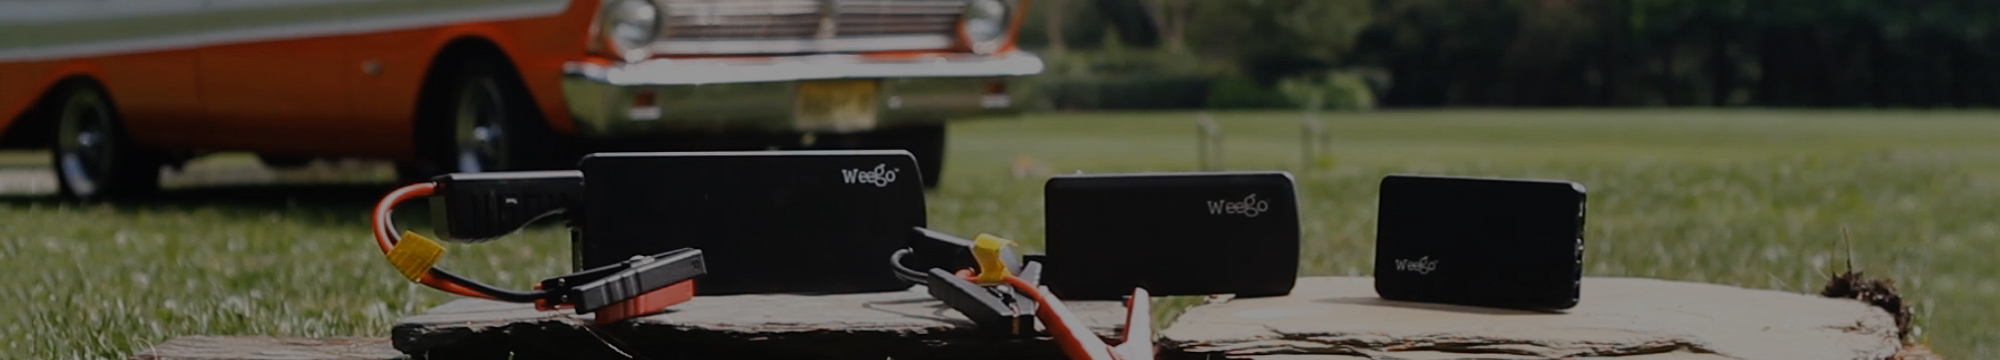 Weego portable car battery jump starters